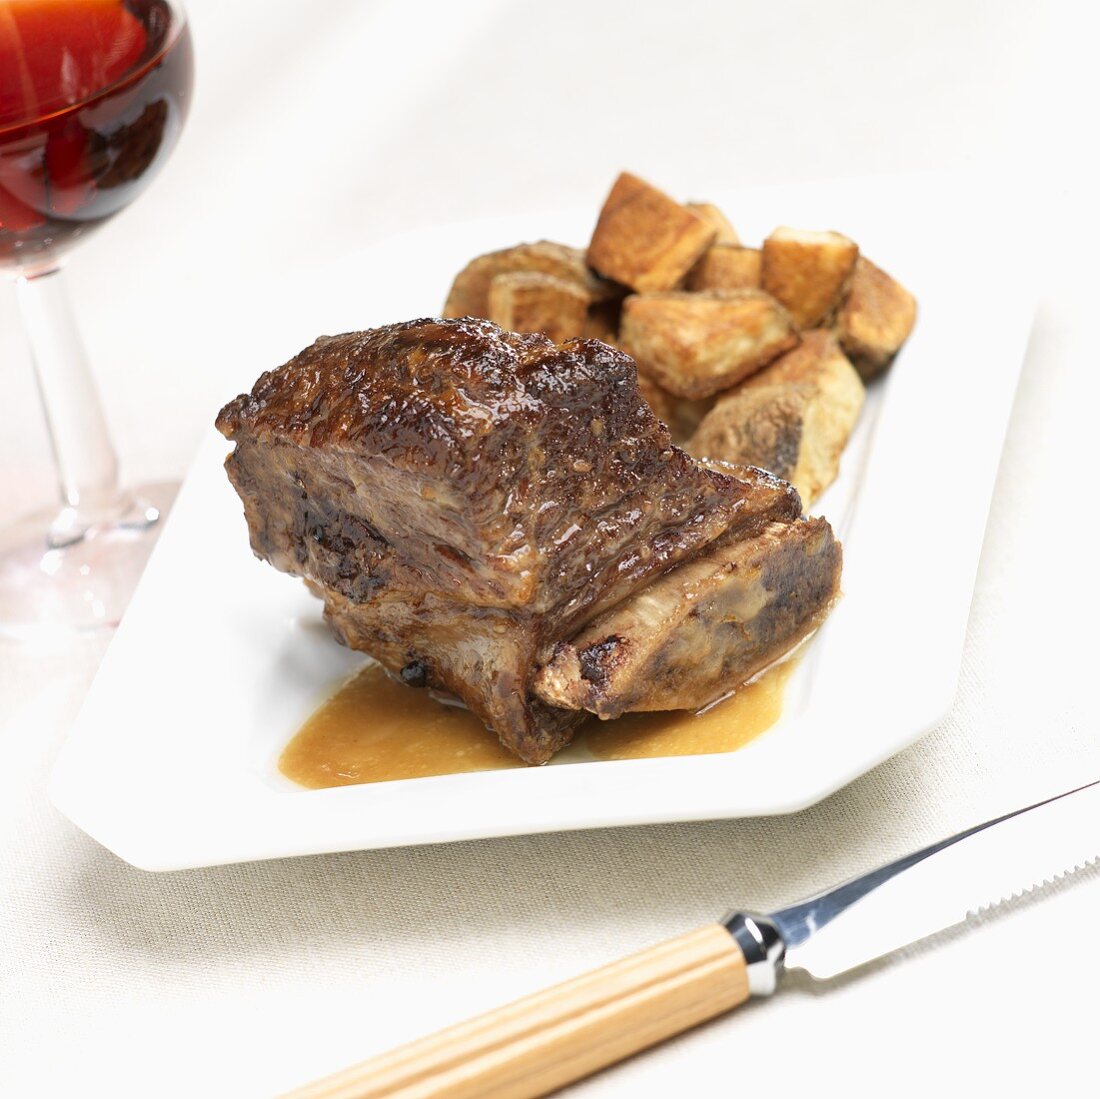 Braised Beef Short Ribs with Roasted Potatoes; Red Wine